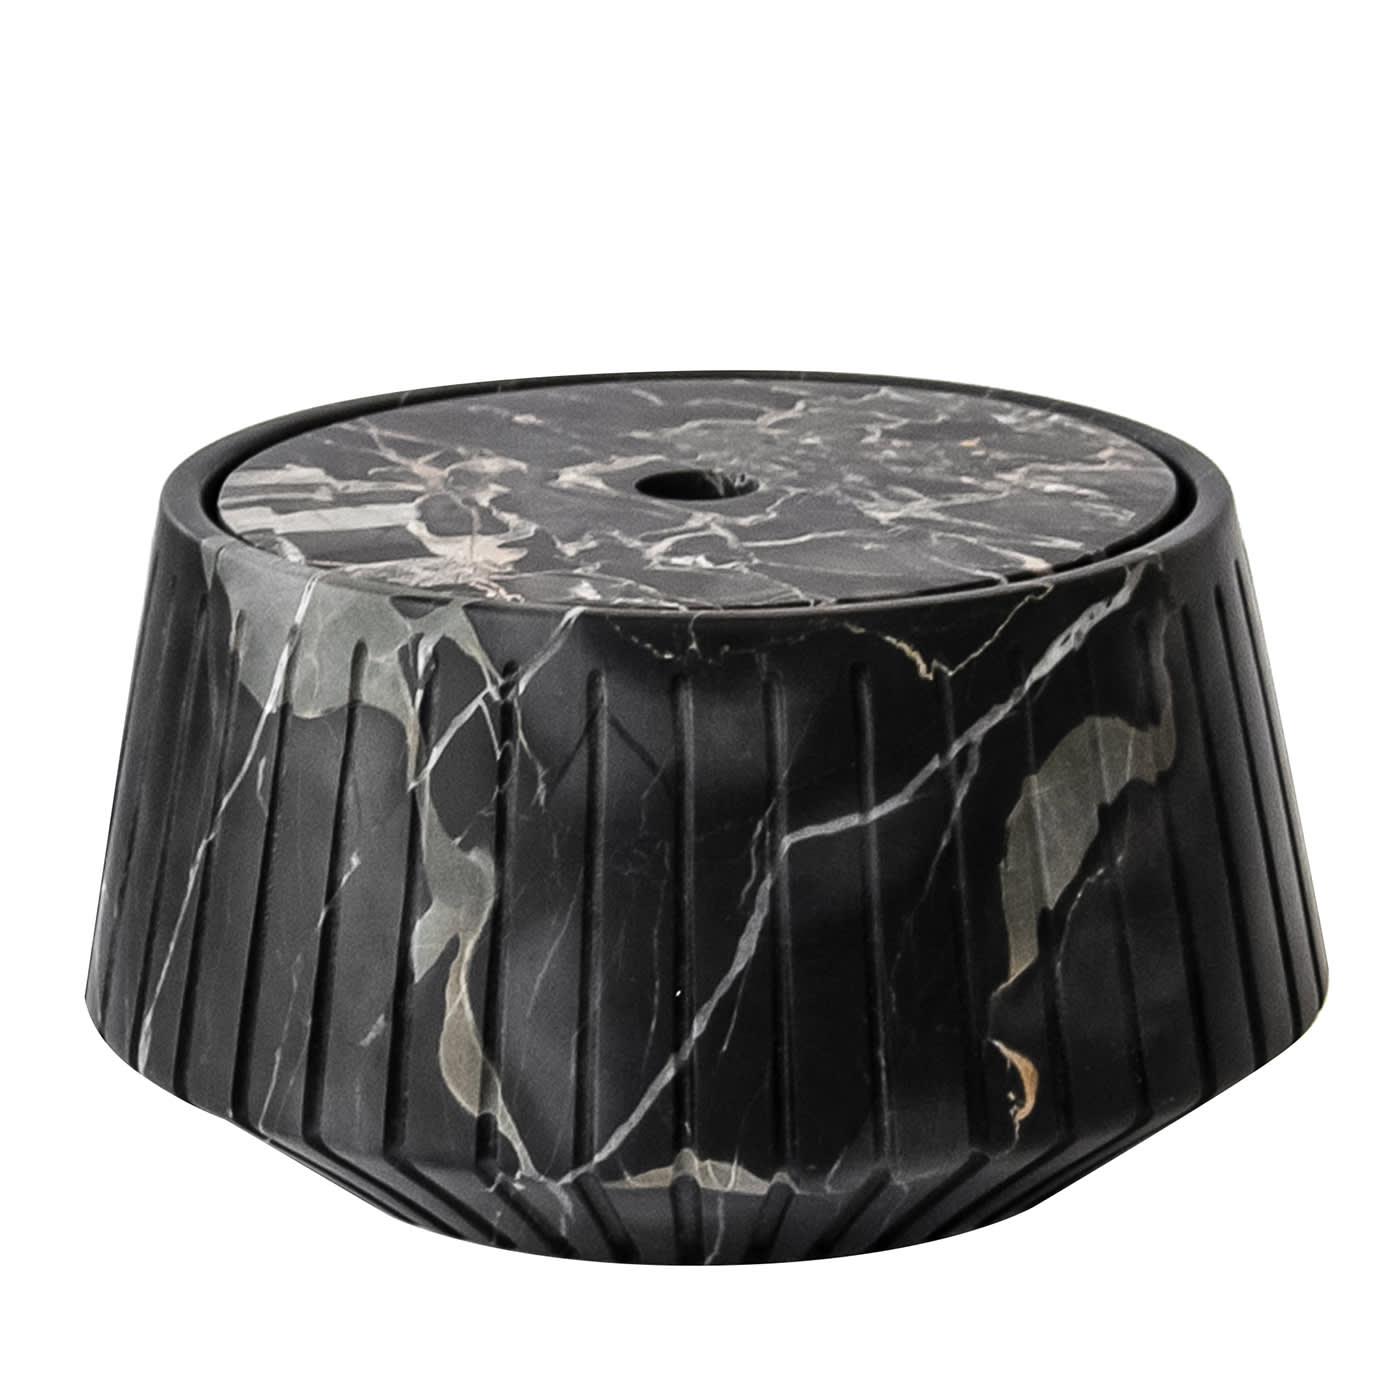 Striped Objects Holder in Portoro marble - FiammettaV Home Collection